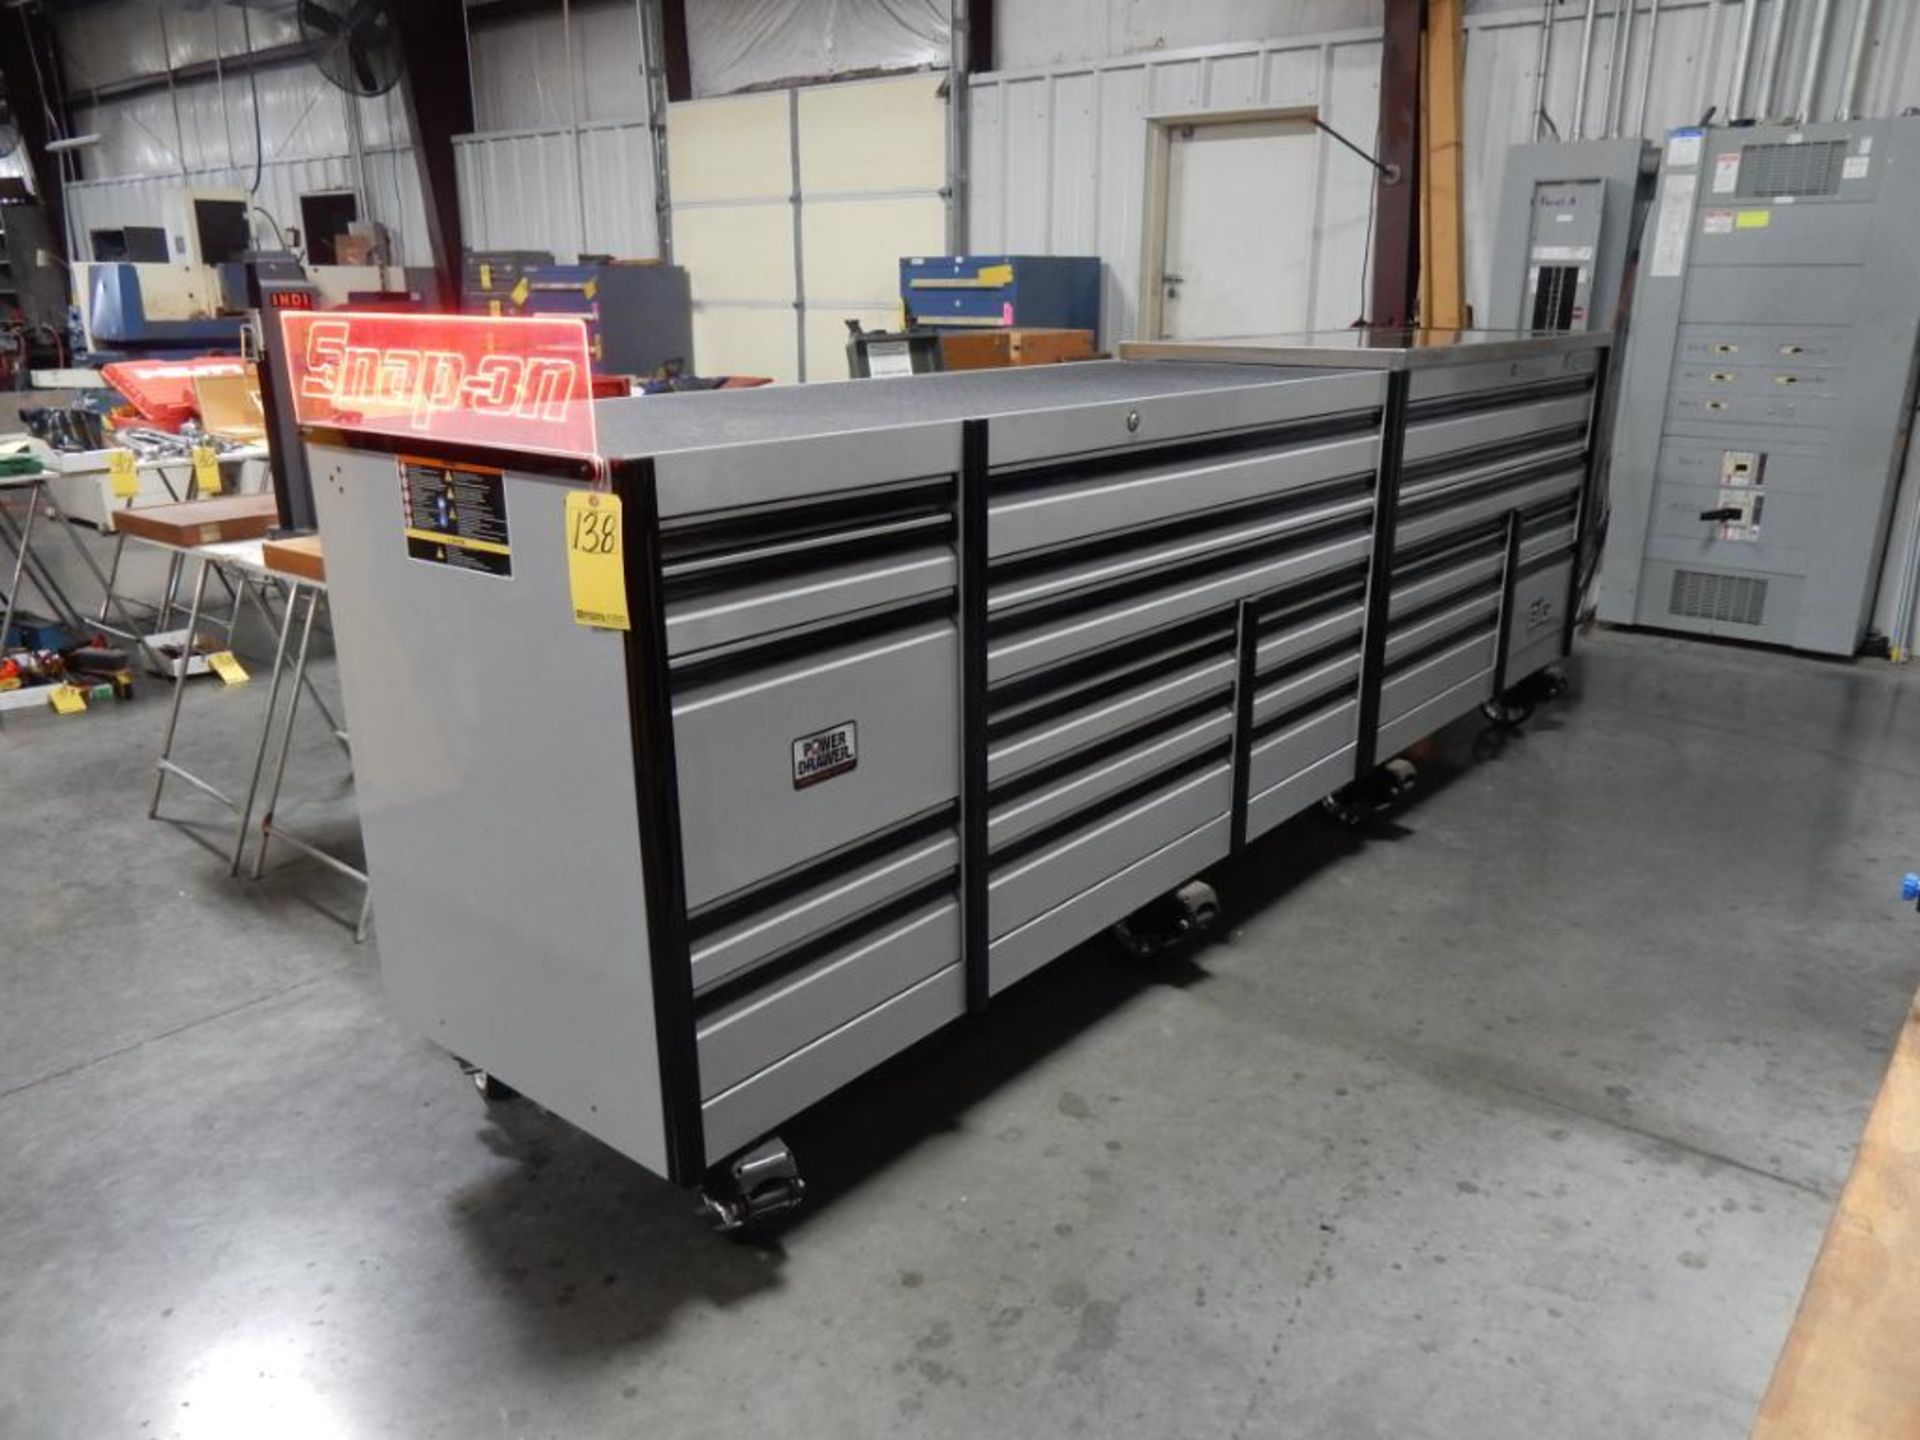 SNAP-ON ROLLING TOOL CABINET, M# KEXP725COPLE, 26-DRAWER, 30" X 12' X 49" T (INCLUDES CASTERS), LIGH